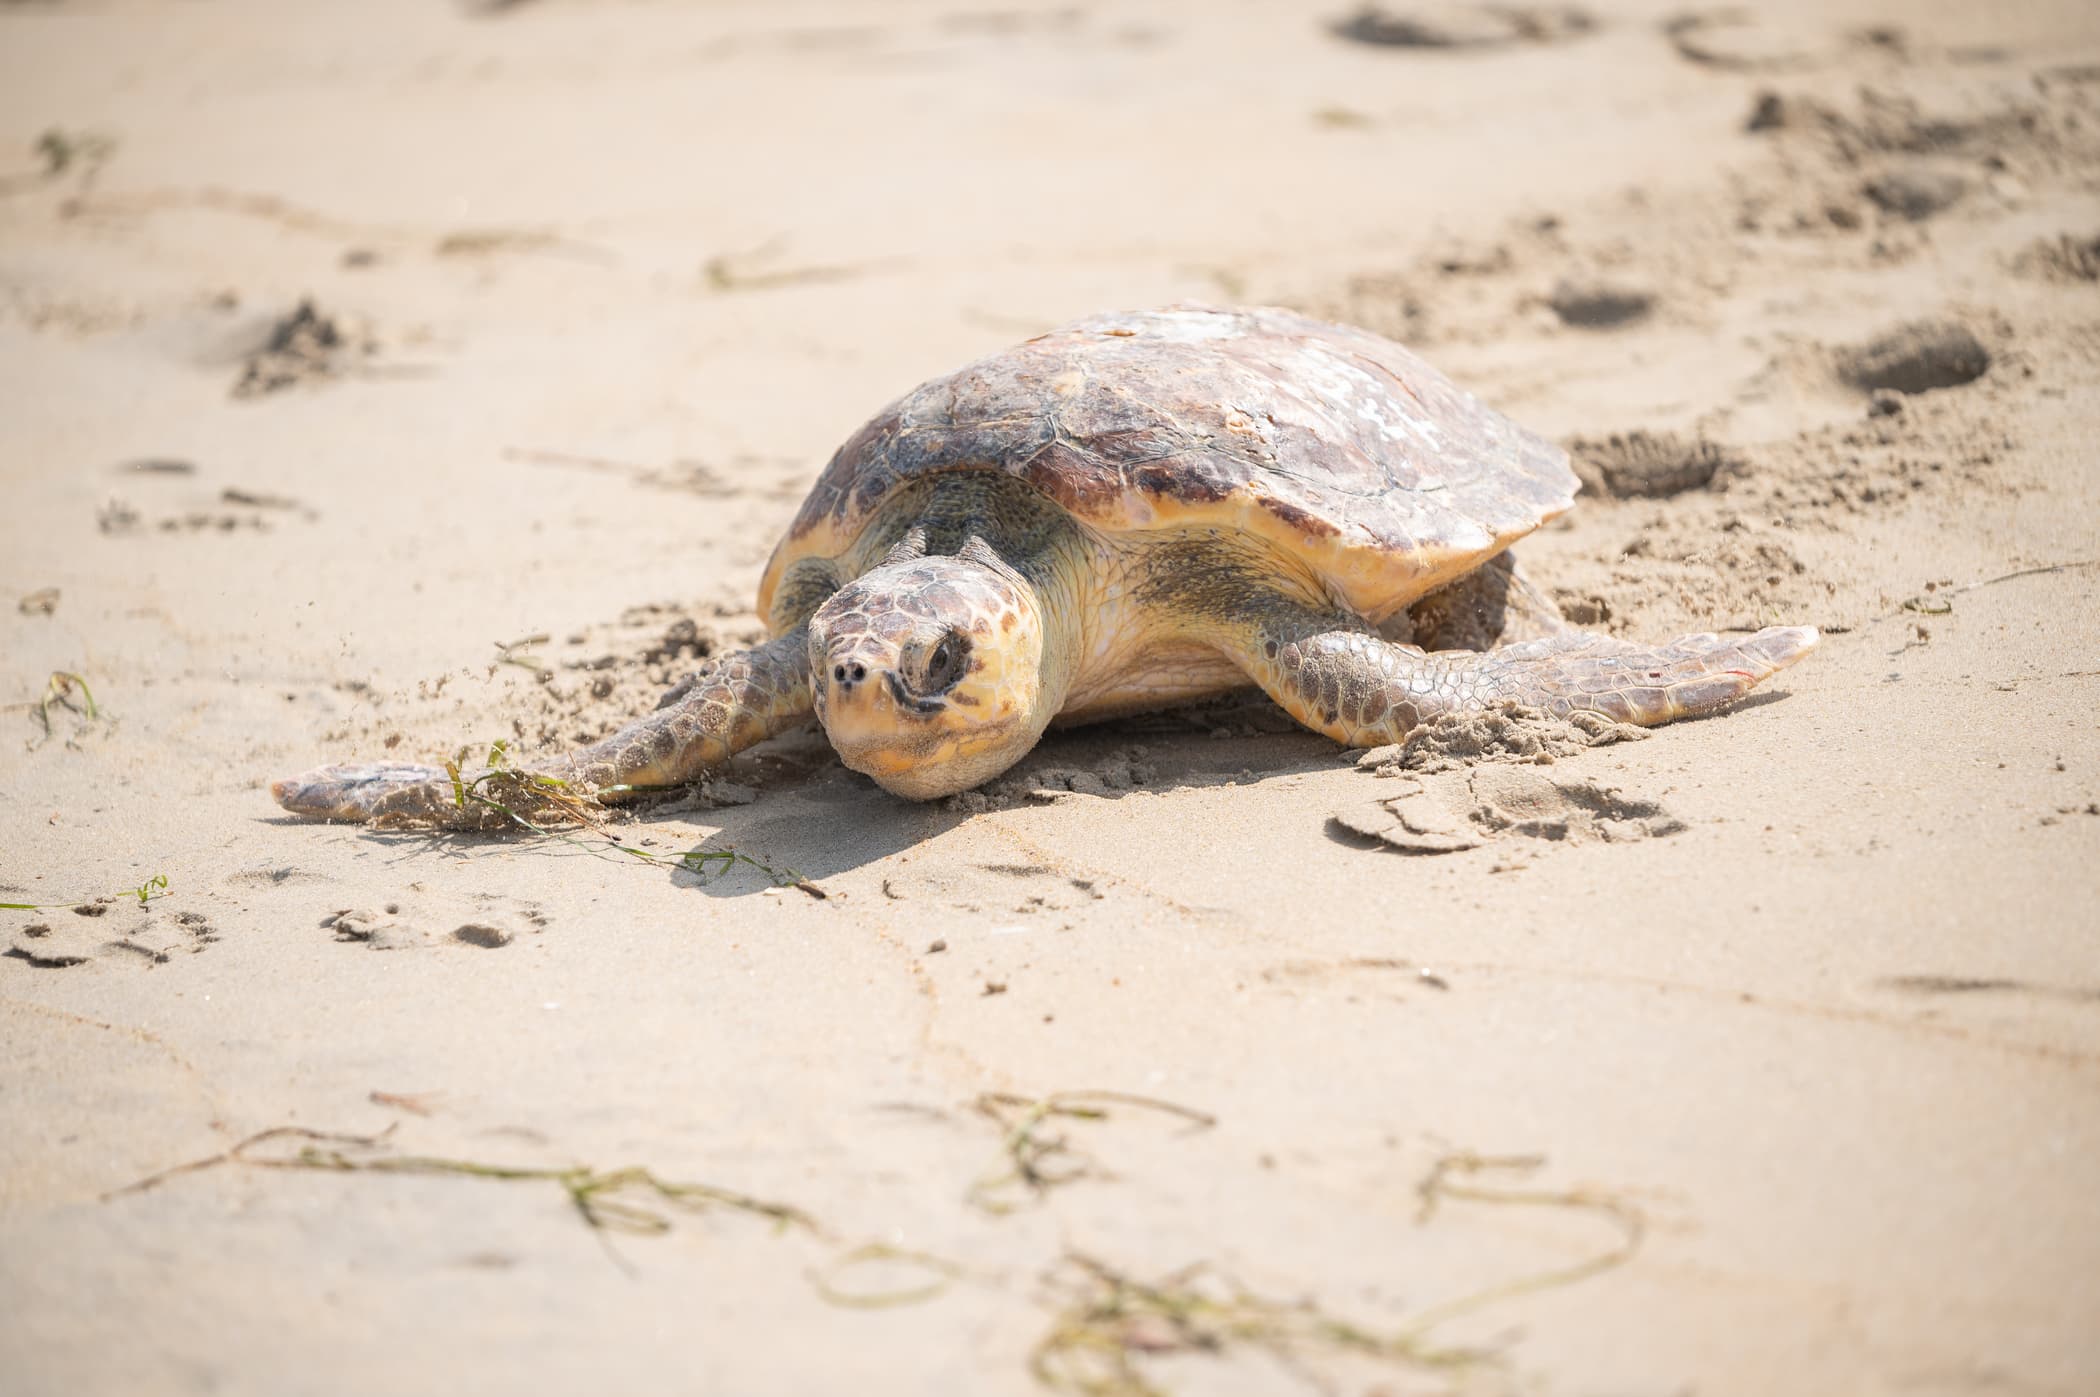 A loggerhead sea turtle scuttles across the sand towards the ocean after being released from rehabilitation at Stranding Response's rehab center